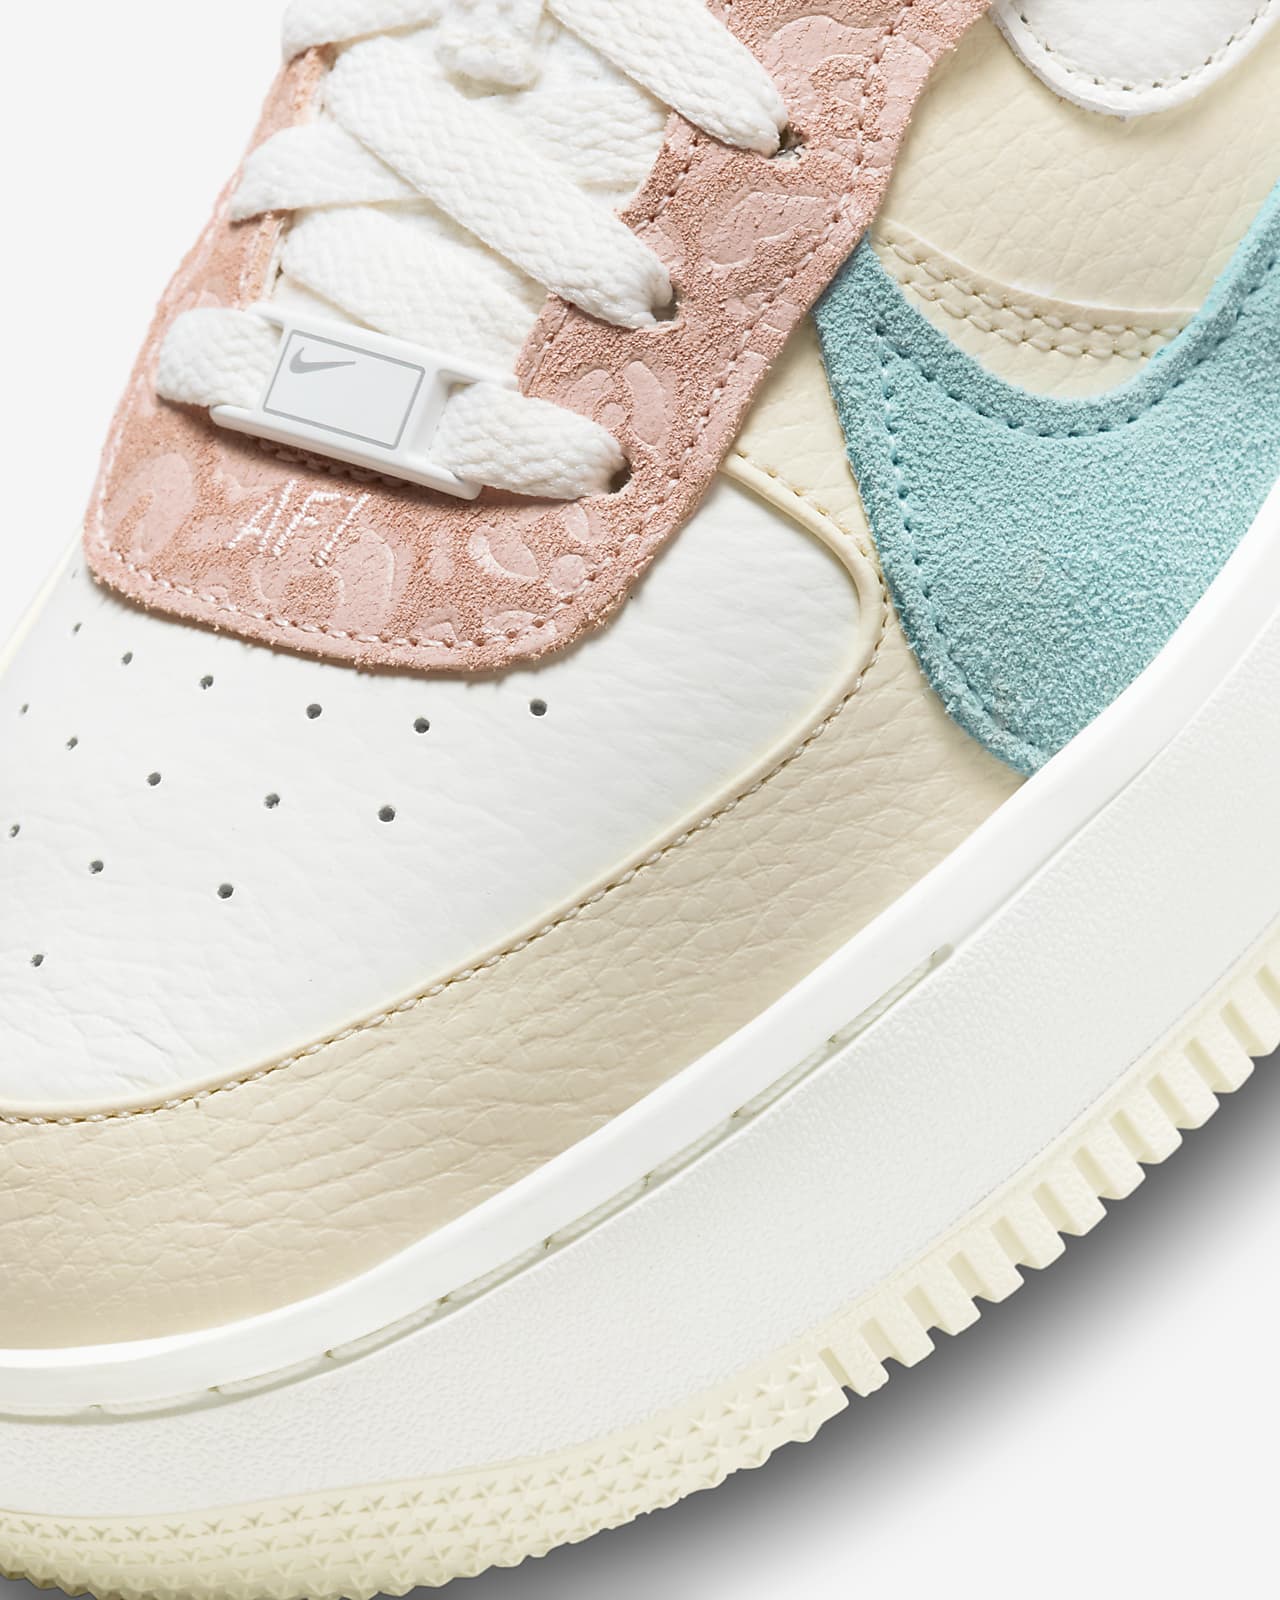 nike womens wmns air force 1 low